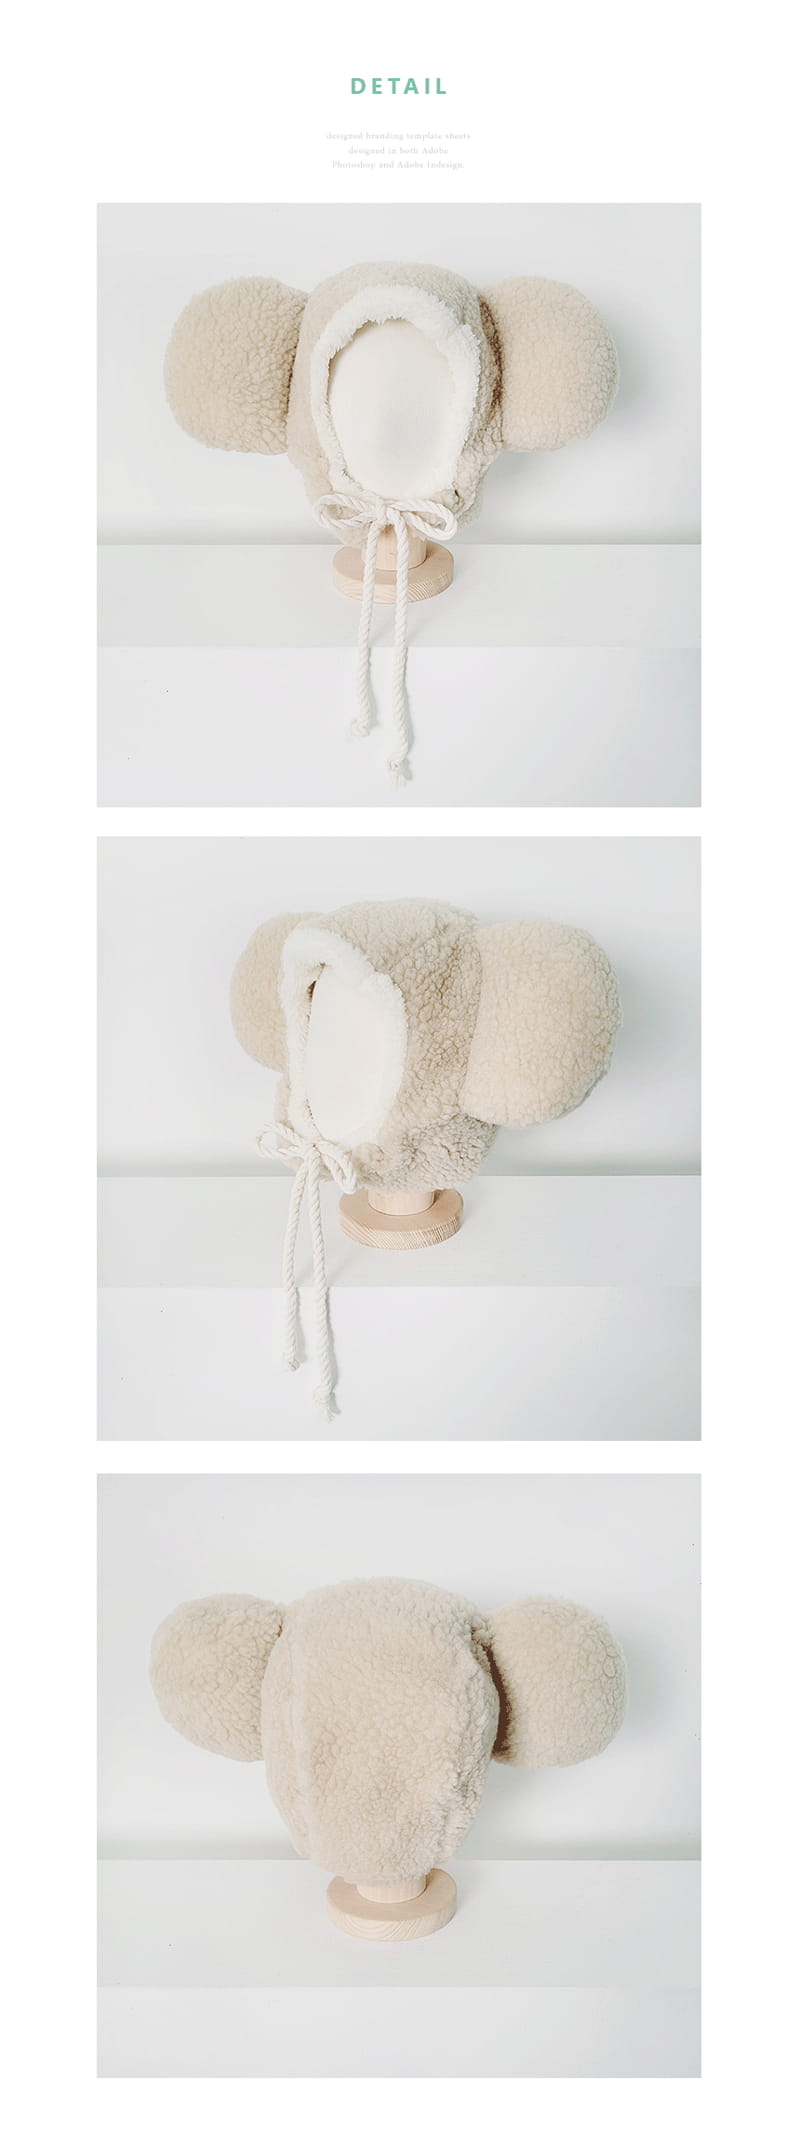 Daily Daily - Korean Children Fashion - #toddlerclothing - Our Home Bear Hat - 12